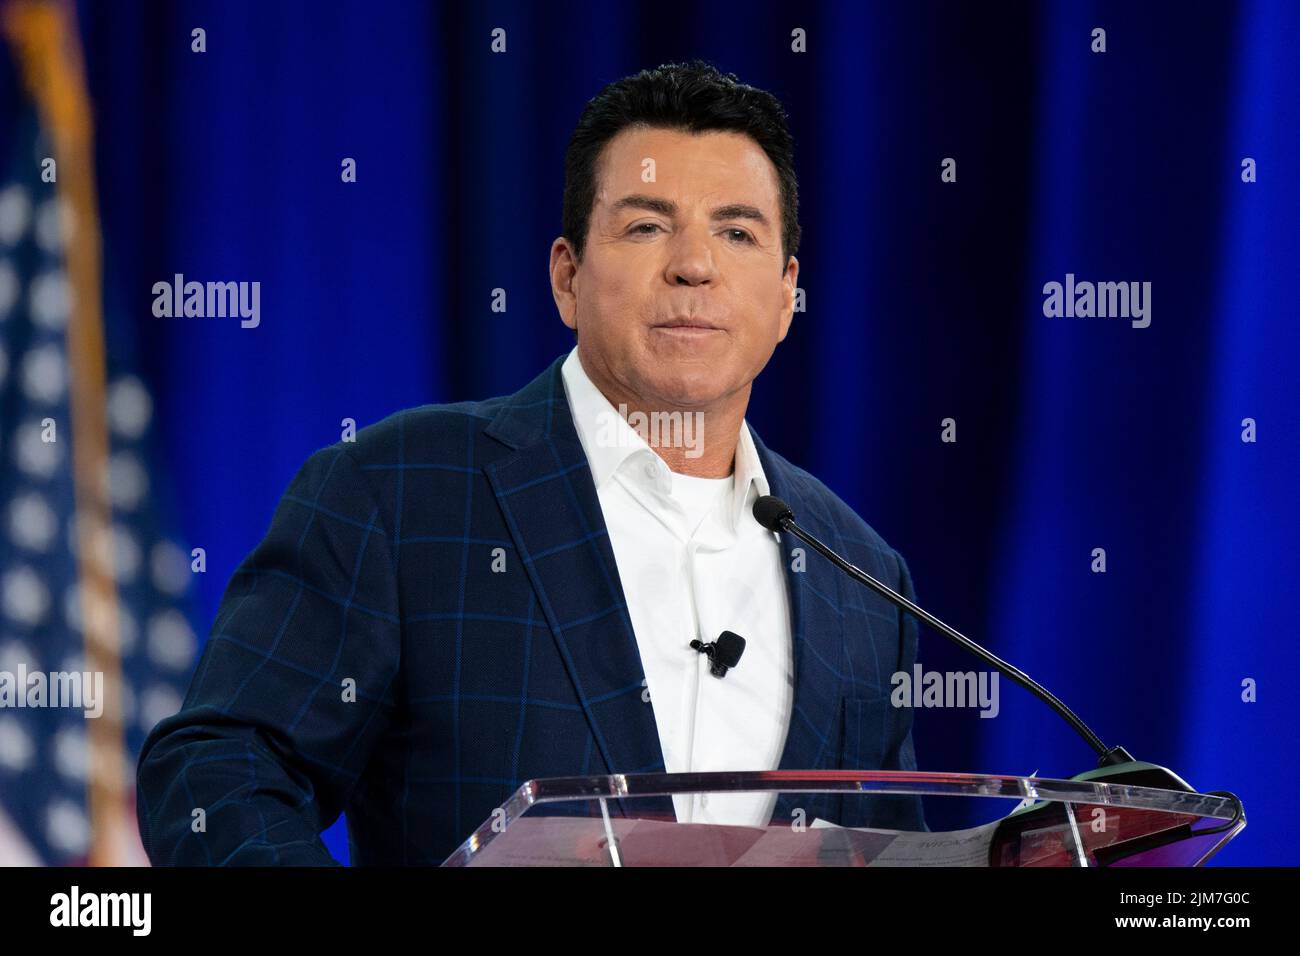 Dallas, TX - August 4, 2022: Papa John speaks during CPAC Texas 2022 conference at Hilton Anatole Stock Photo